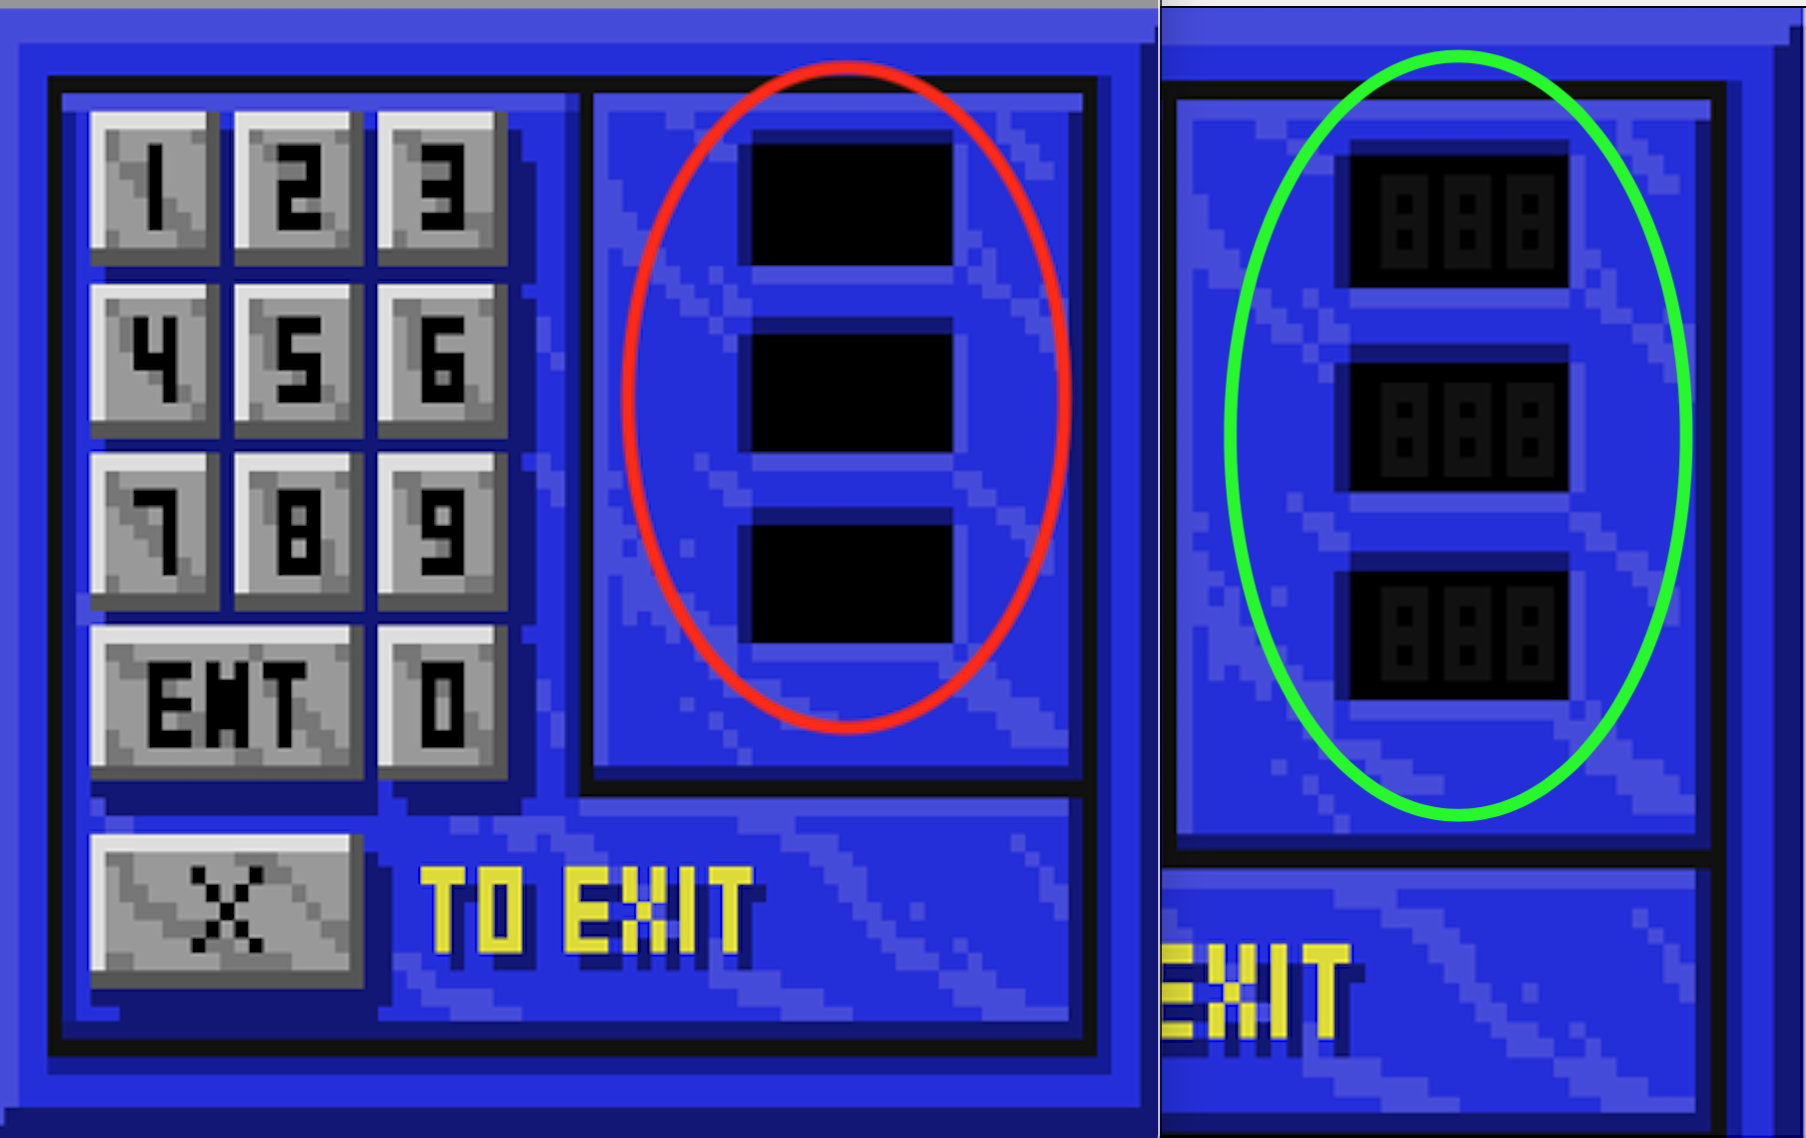 Shows changes to view 502, the laser hallway keypad.